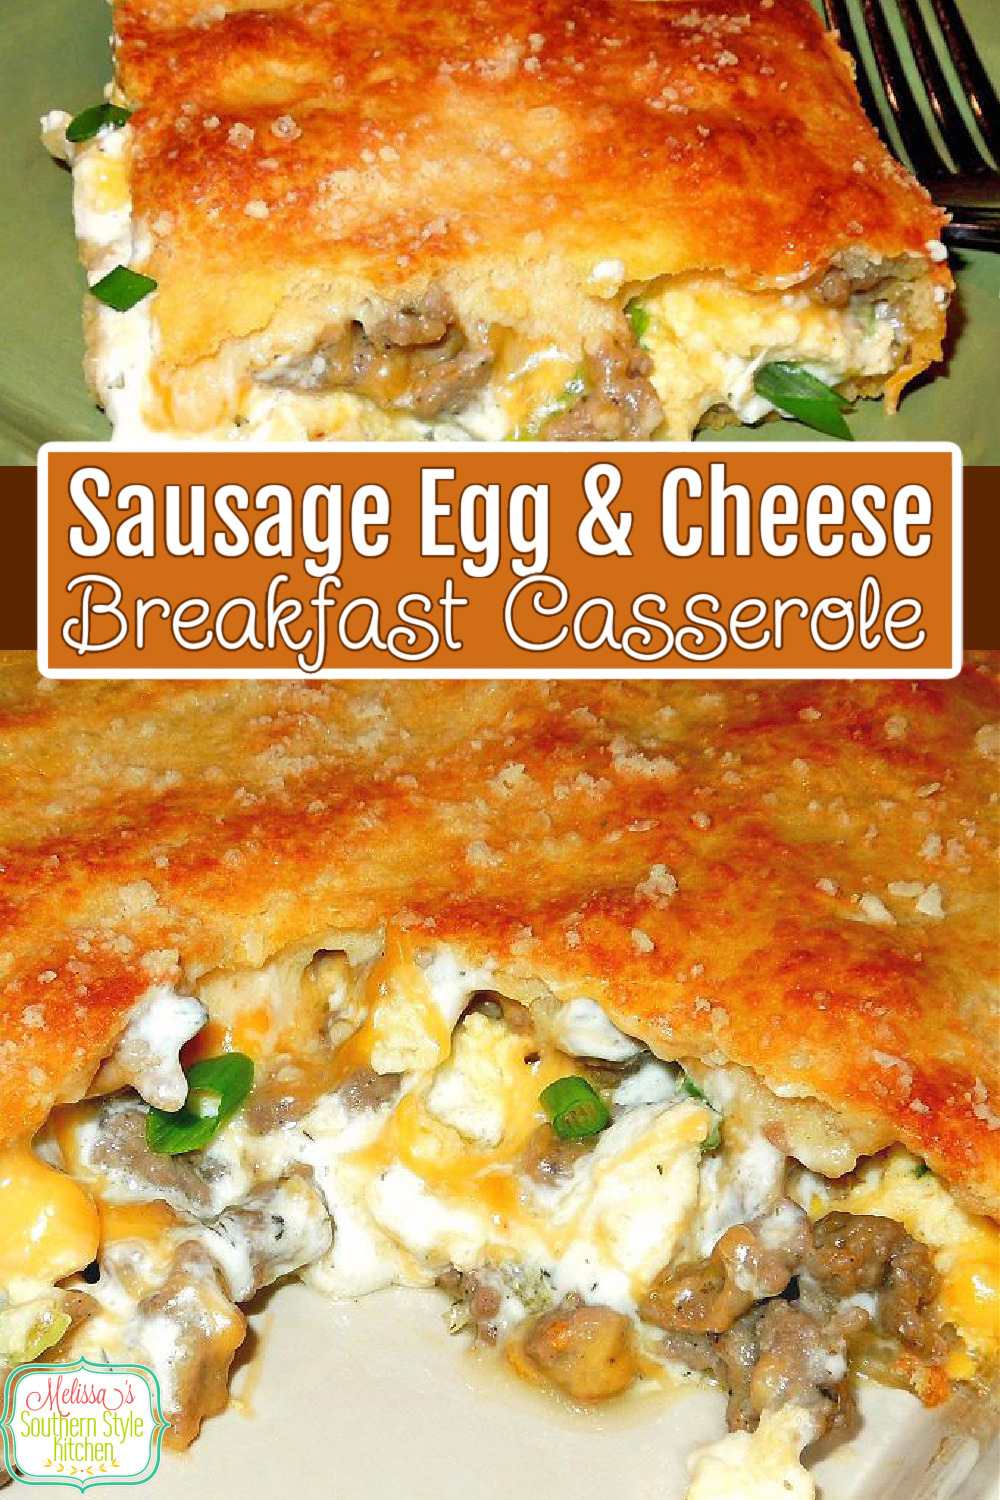 Start your morning right with a piece of Sausage Egg and Cheese Breakfast Casserole #breakfastcasserole #brunch #overnightcasserole #sausageanseggs #sausageeggandcheese #sausageandeggcasserole #casserolerecipes #casseroles #holidaybrunch #southernfood #southernrecipes via @melissasssk